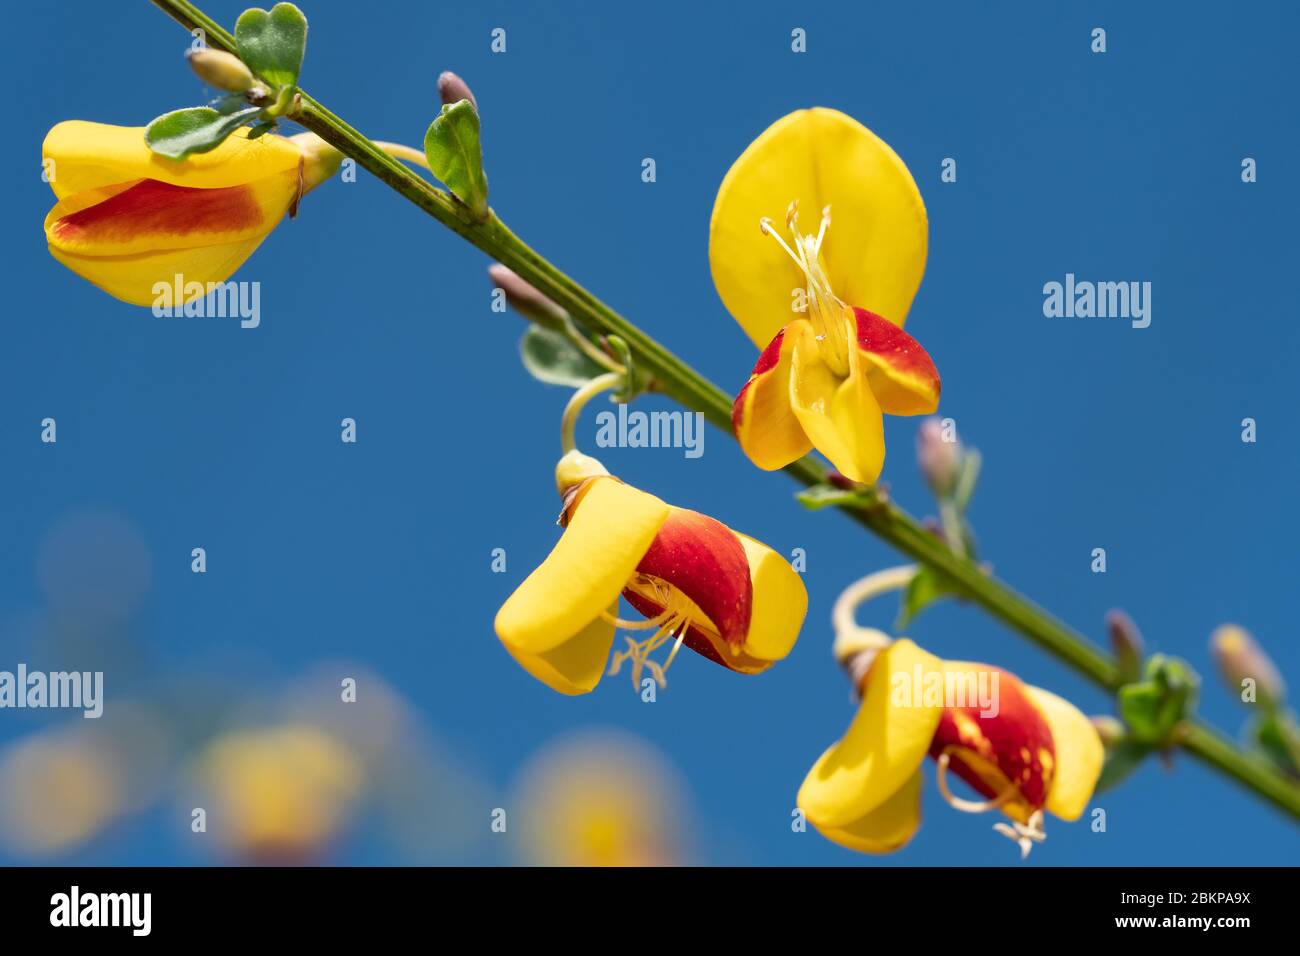 Close-up of yellow and red blossom against blue sky Stock Photo